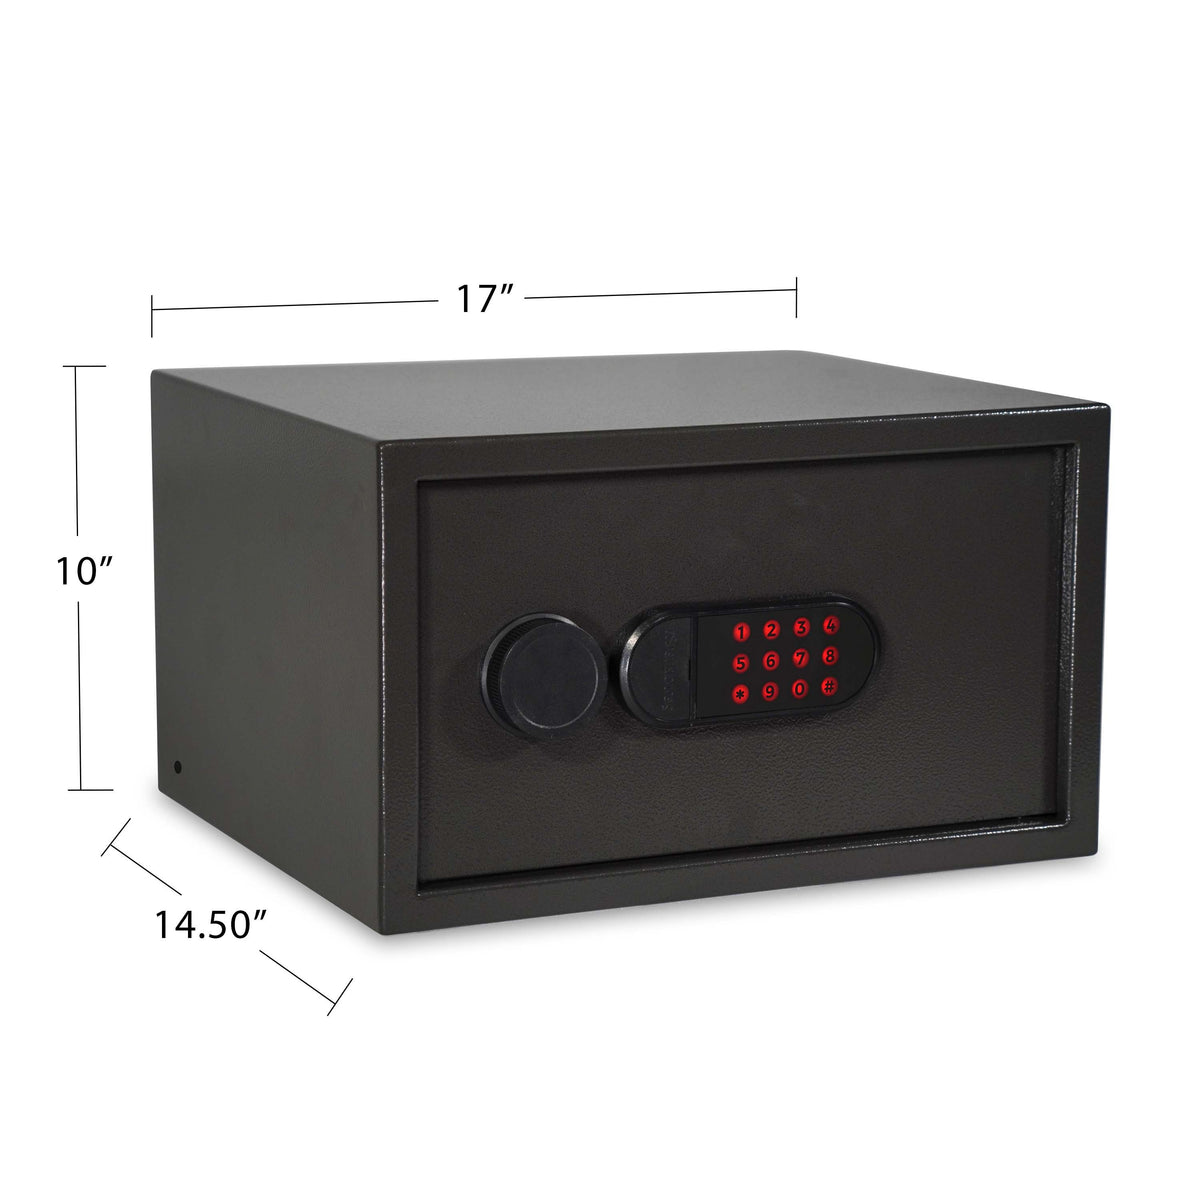 Sports Afield SA-PVLP-02 Home and Office Security Safe Dimensions